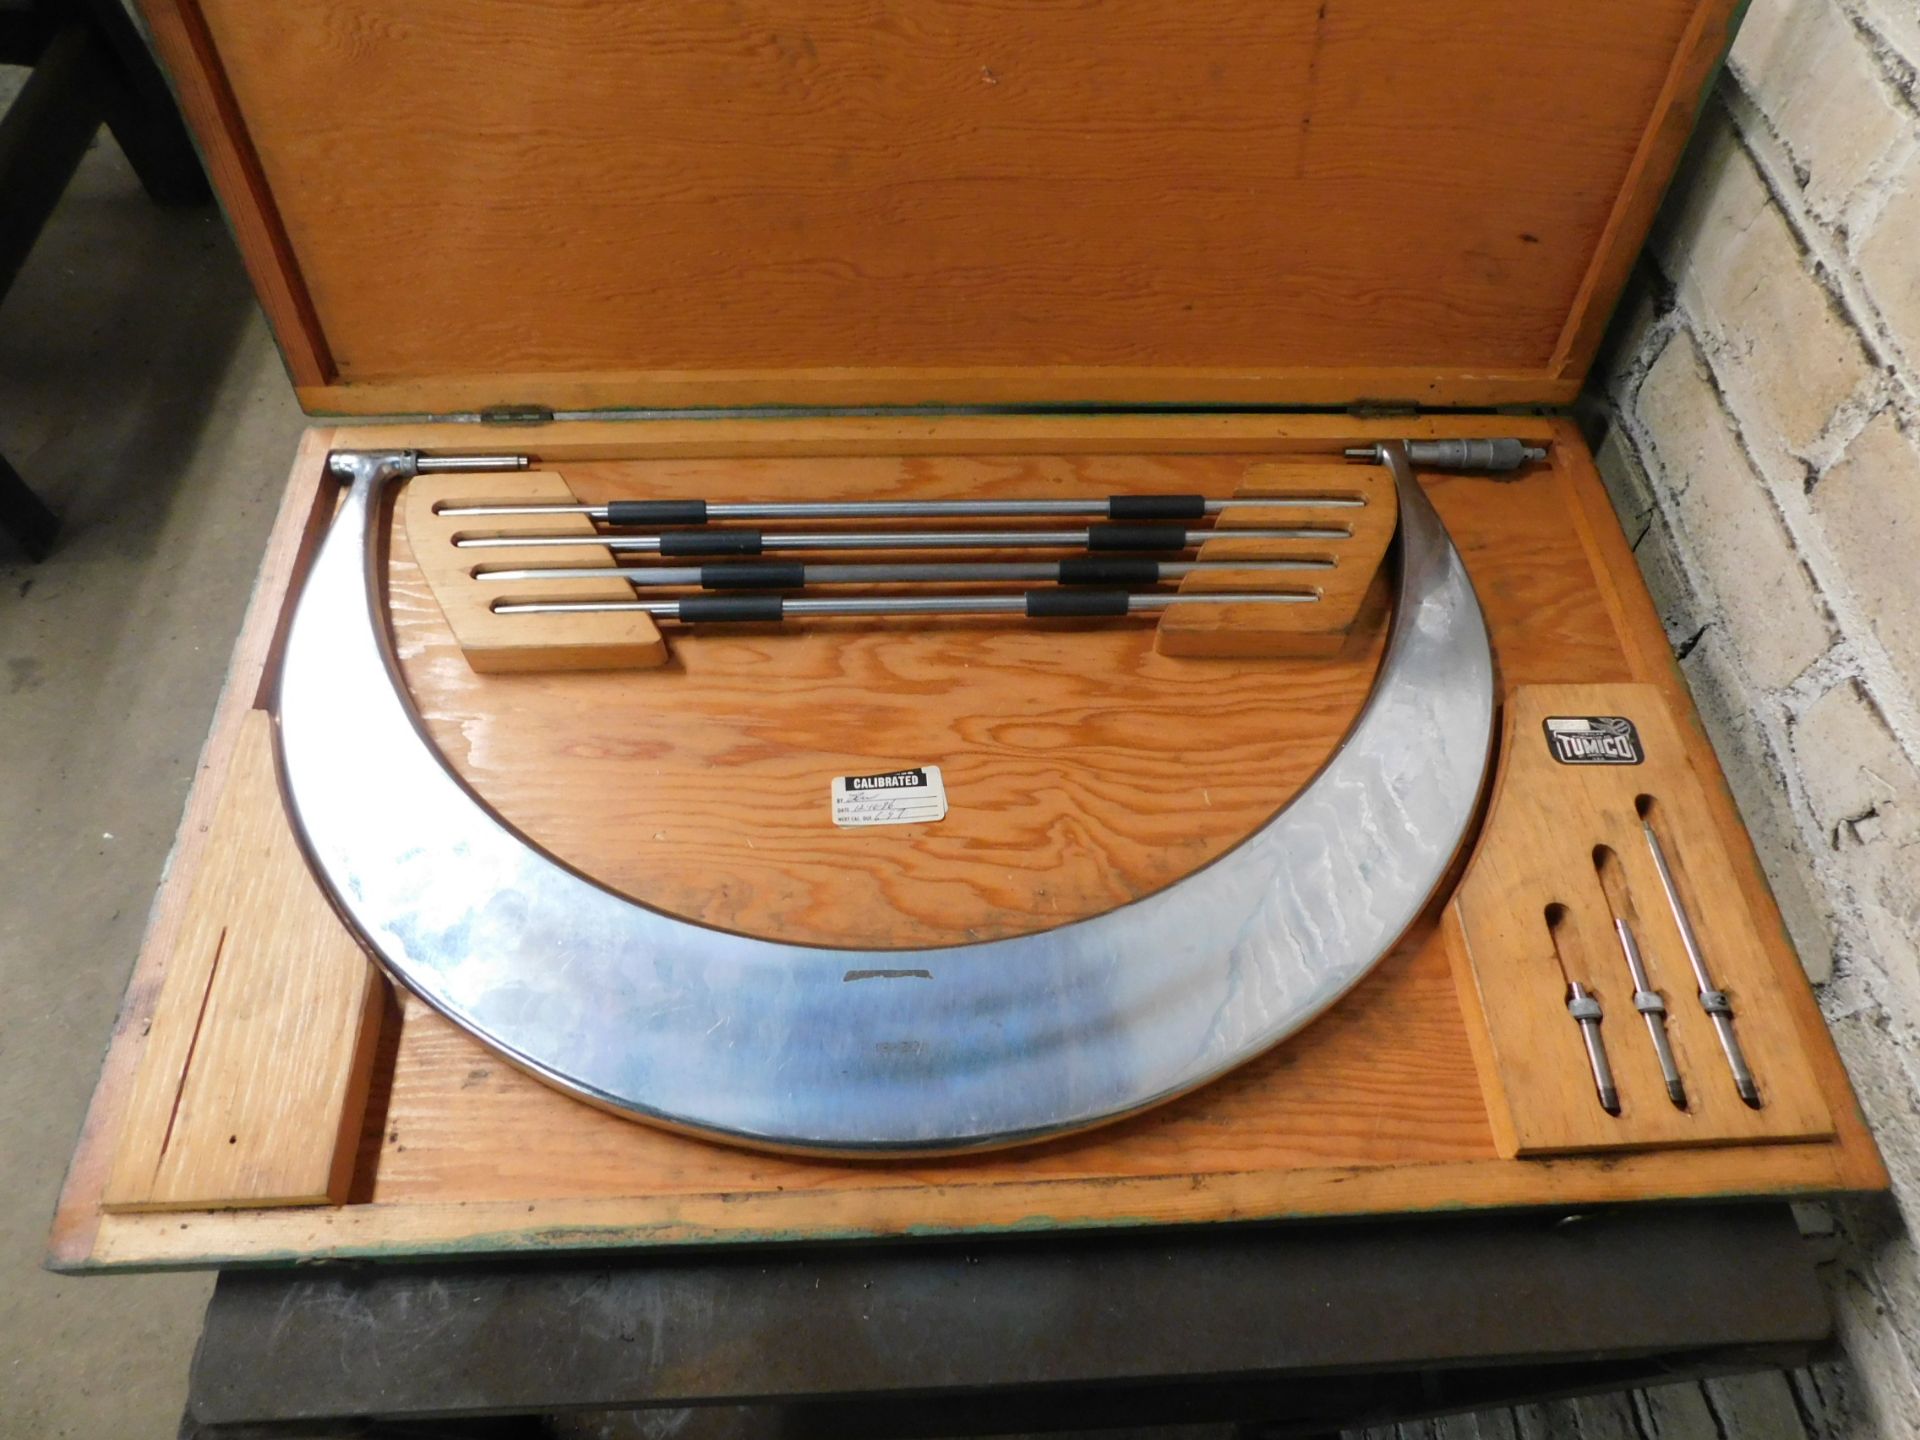 Tumico 16" - 20" Micrometer with Standards